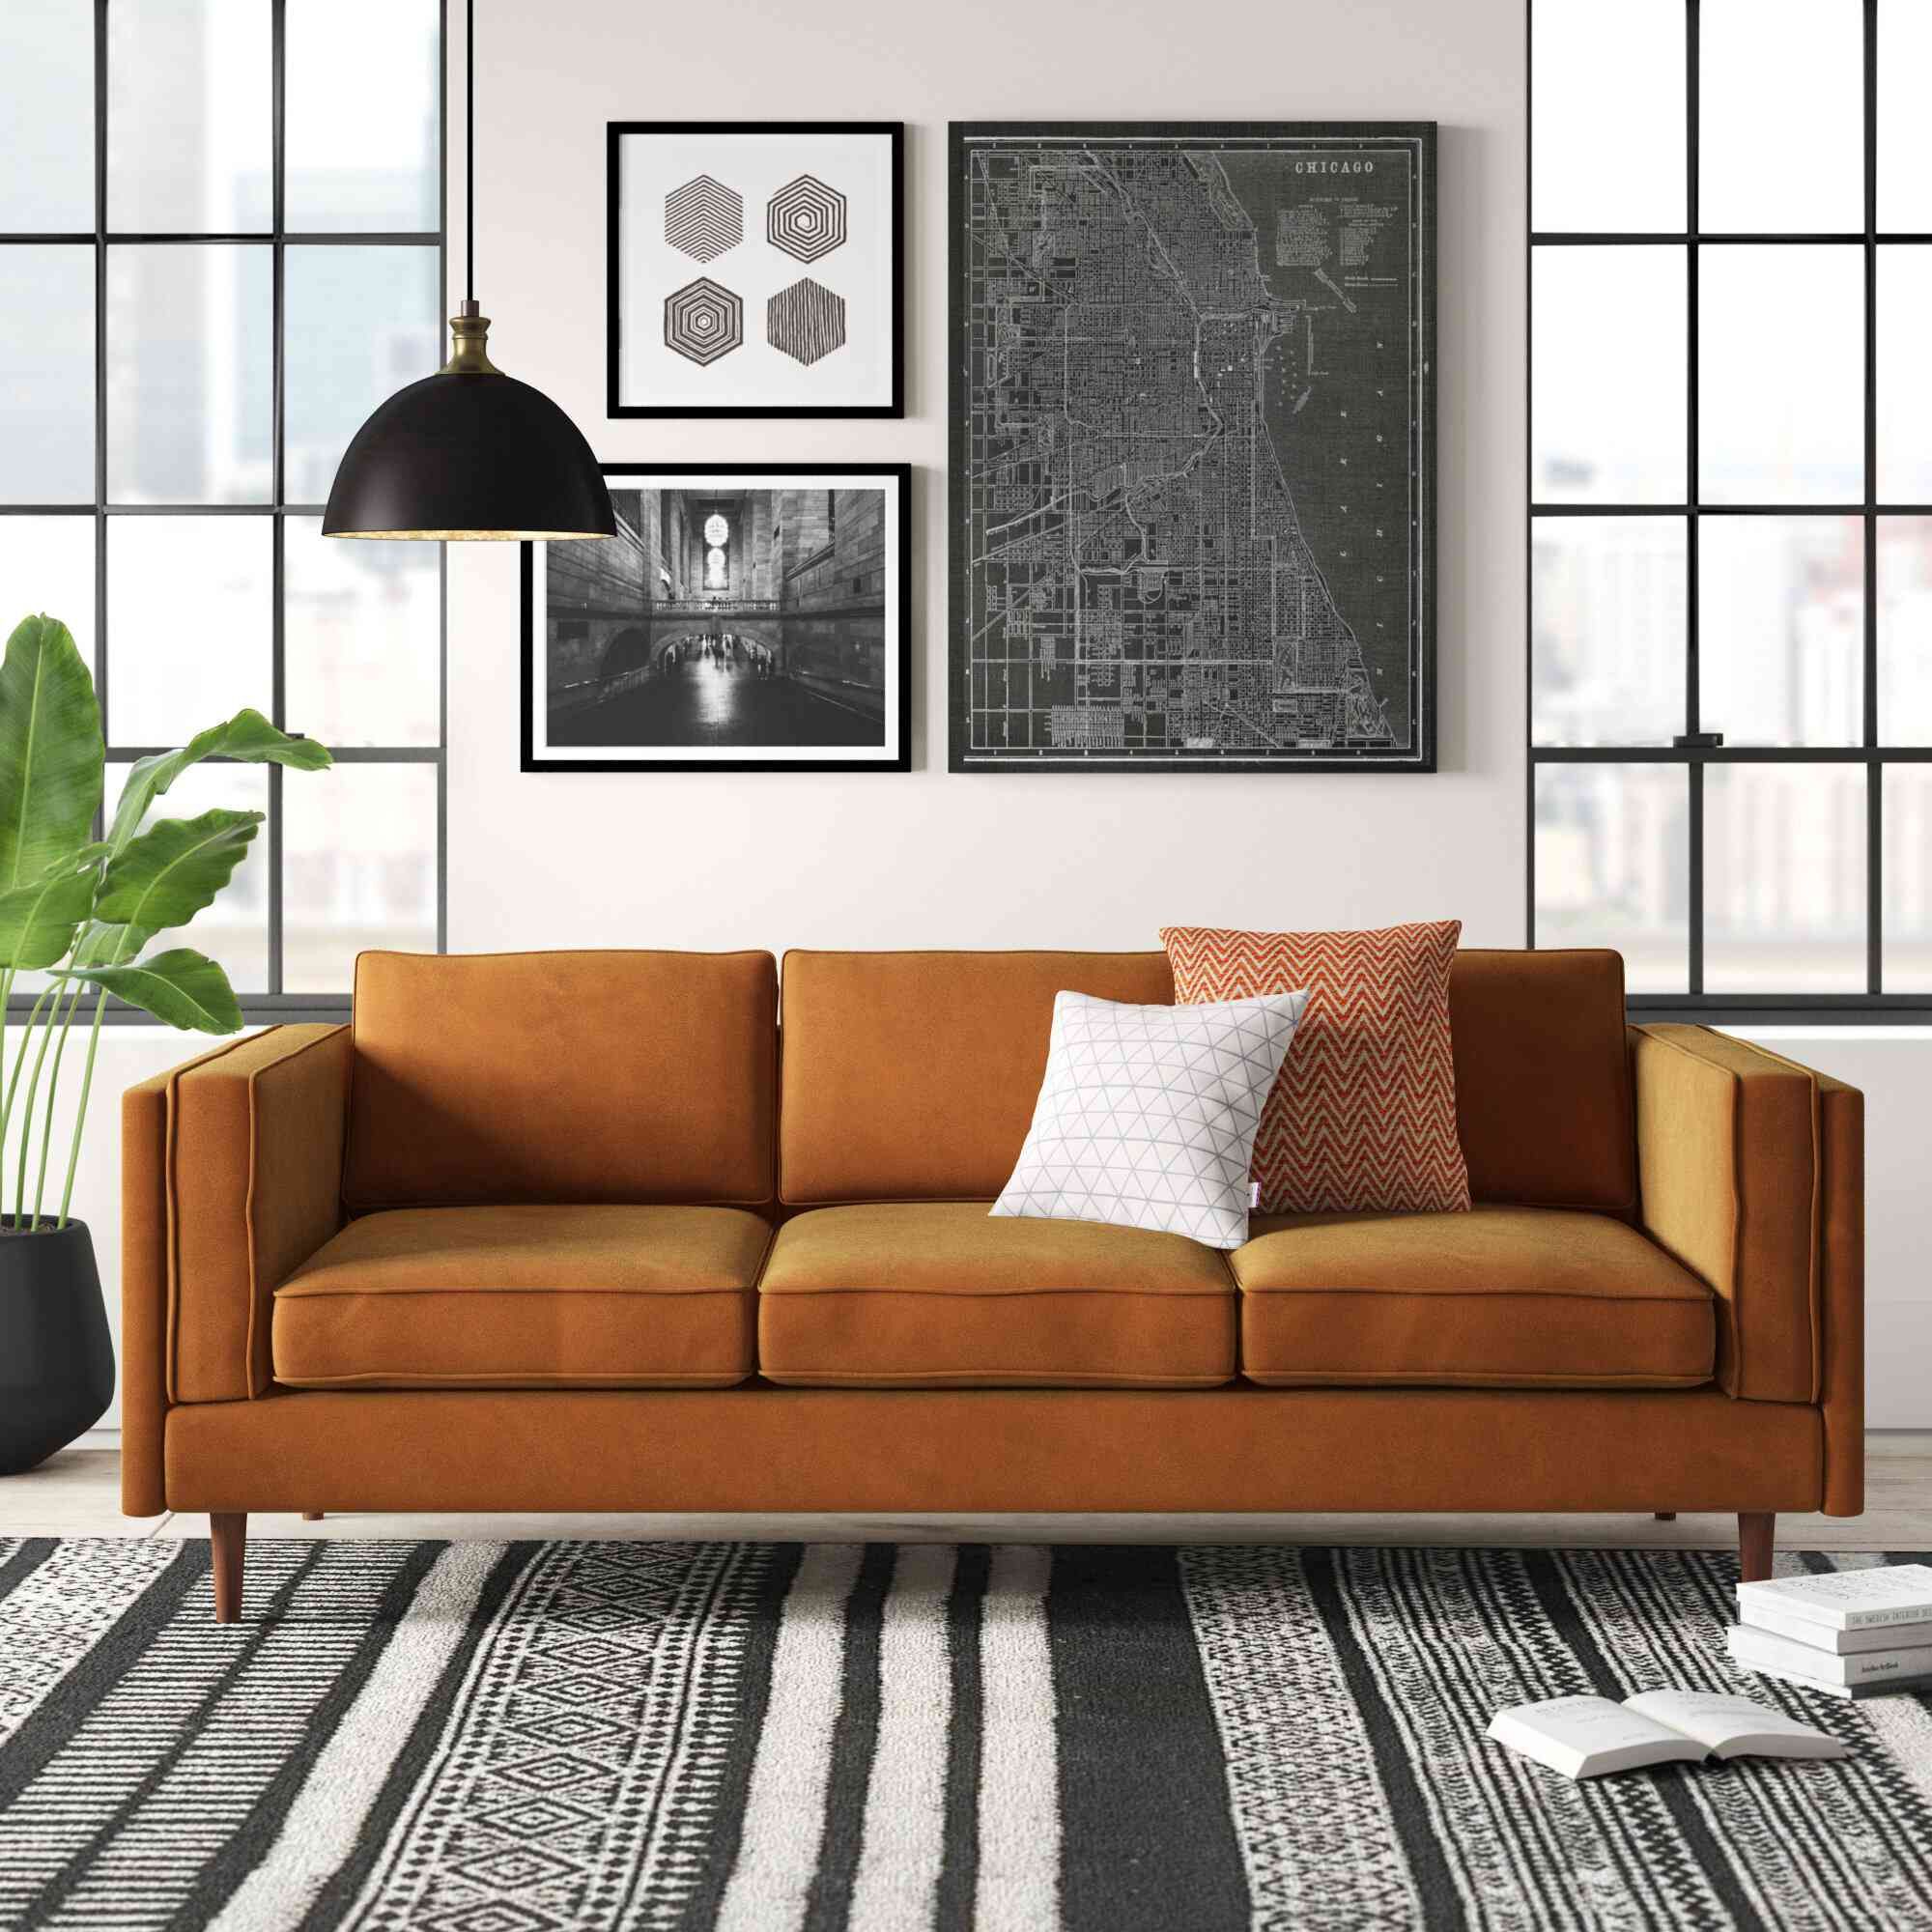 The 12 Best Places To Buy Mid Century Modern Sofas Of 2022 For Mid Century Modern Sofas (View 4 of 20)